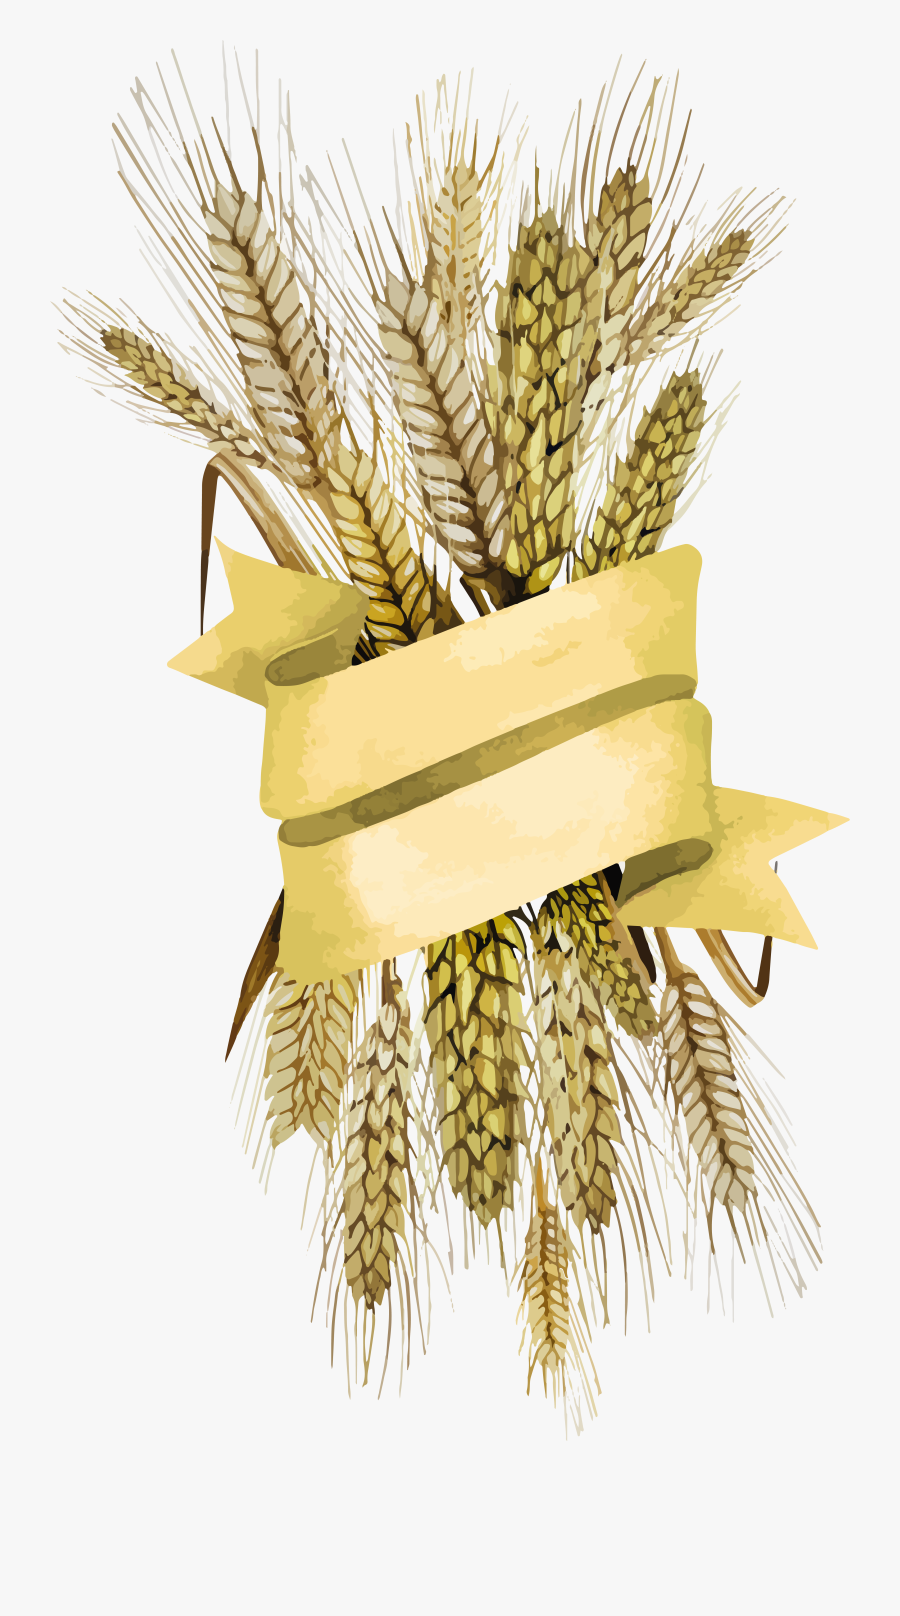 Wheat Png - Wheat, Transparent Clipart